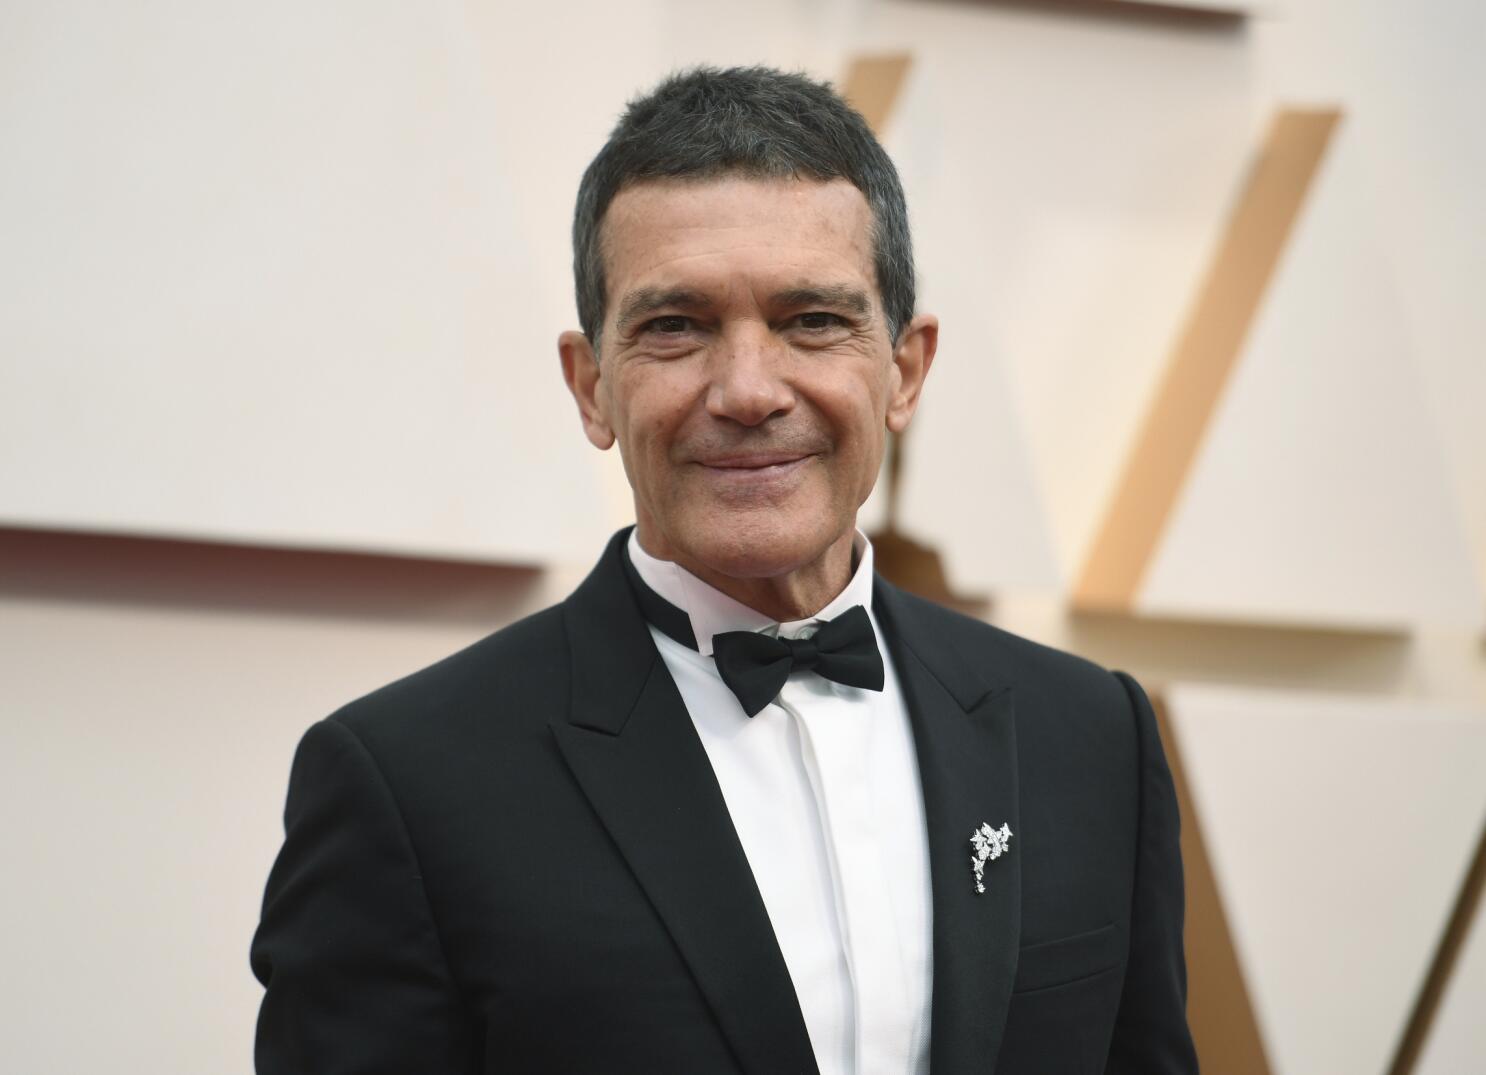 Antonio Banderas to Receive the 2023 President’s Award From the Latin Recording Academy